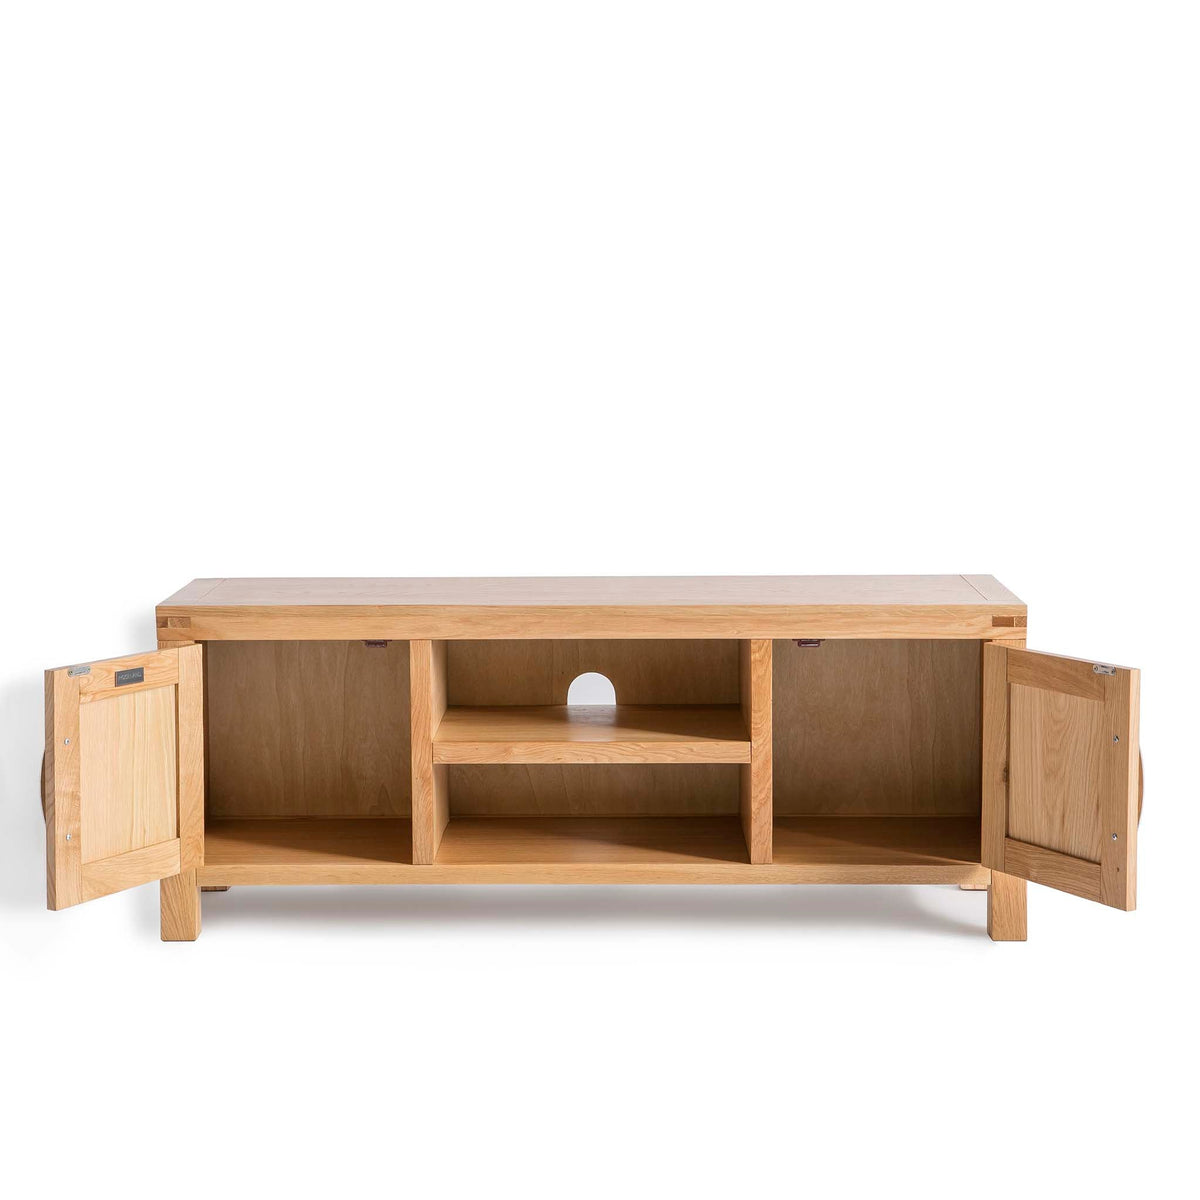 The Abbey Light Oak Large TV Stand - With doors open